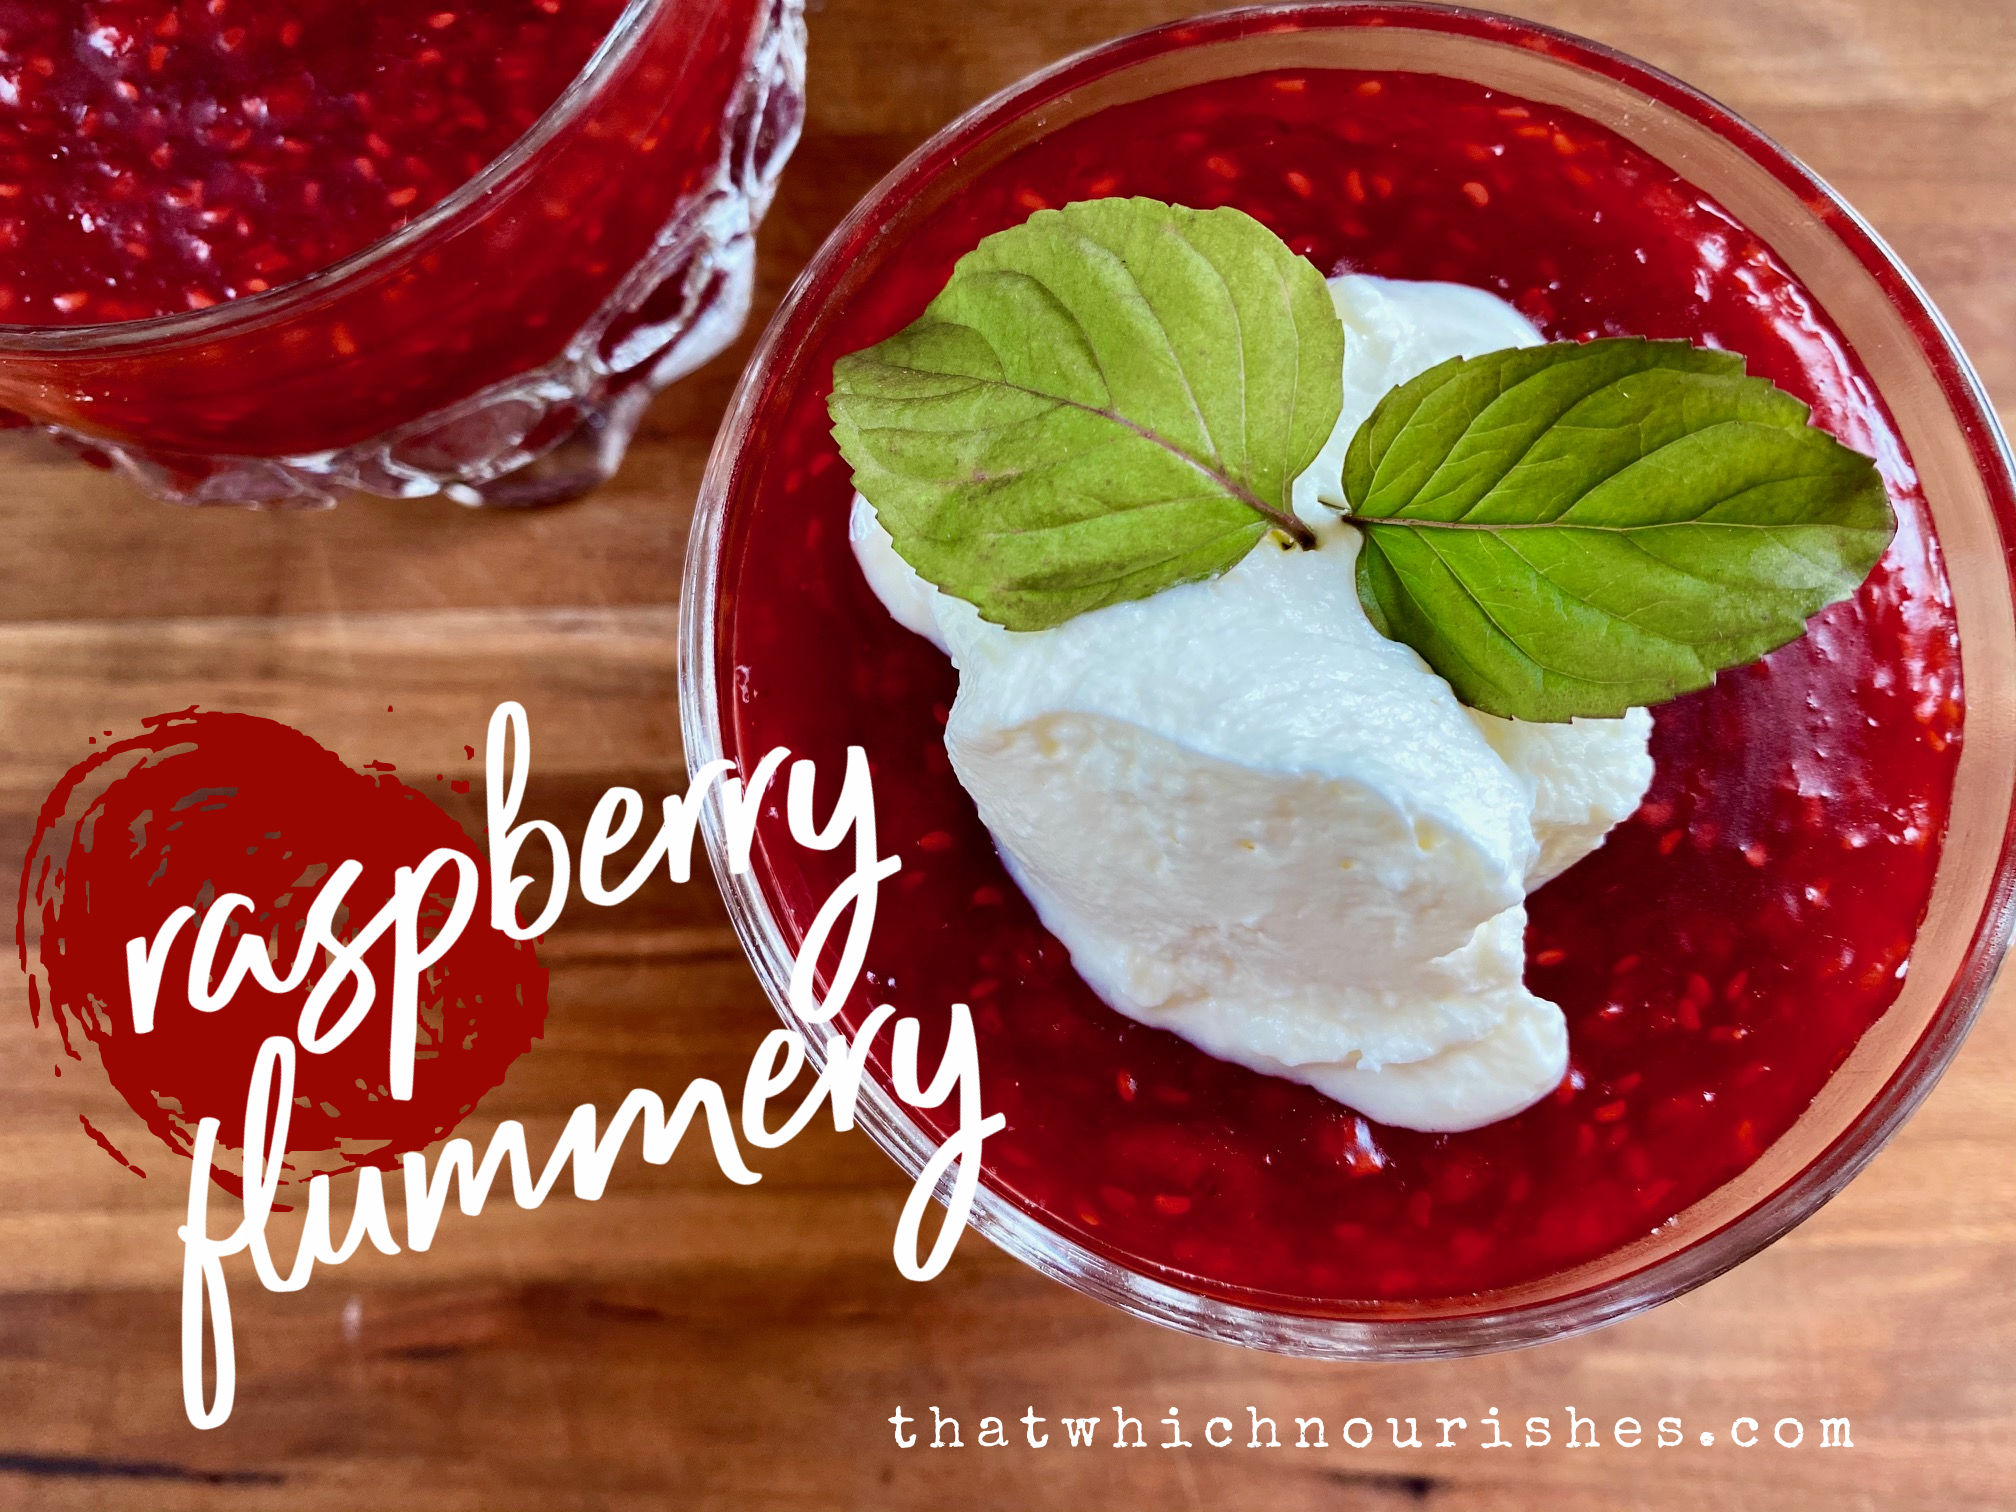 Raspberry Flummery -- A tart, berry pudding that is simply the best (and simplest) dessert that ever happened. | thatwhichnourishes.com